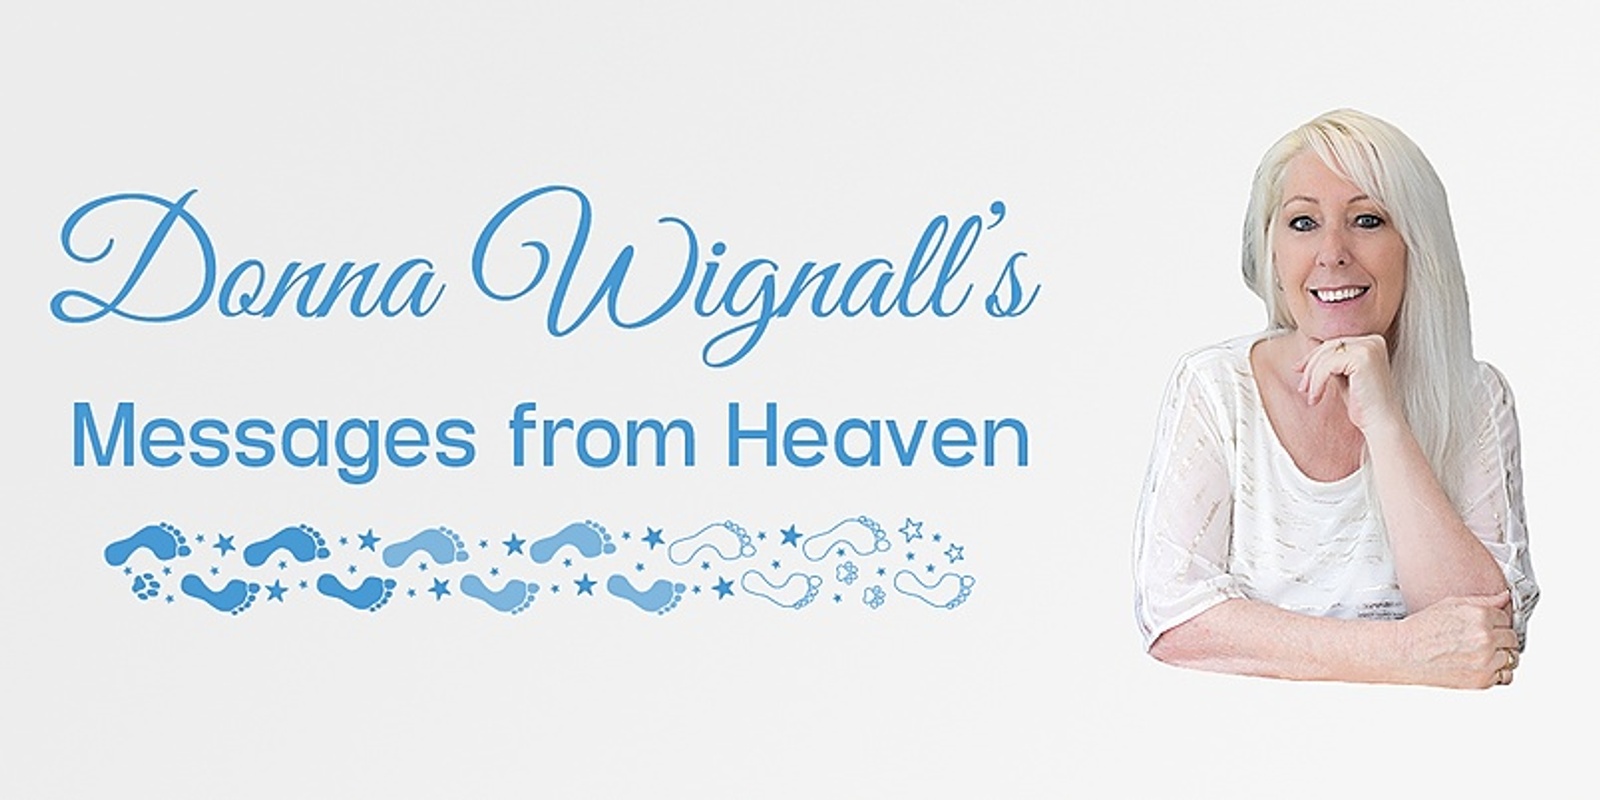 Messages from Heaven presented by Donna Wignall - Currambine